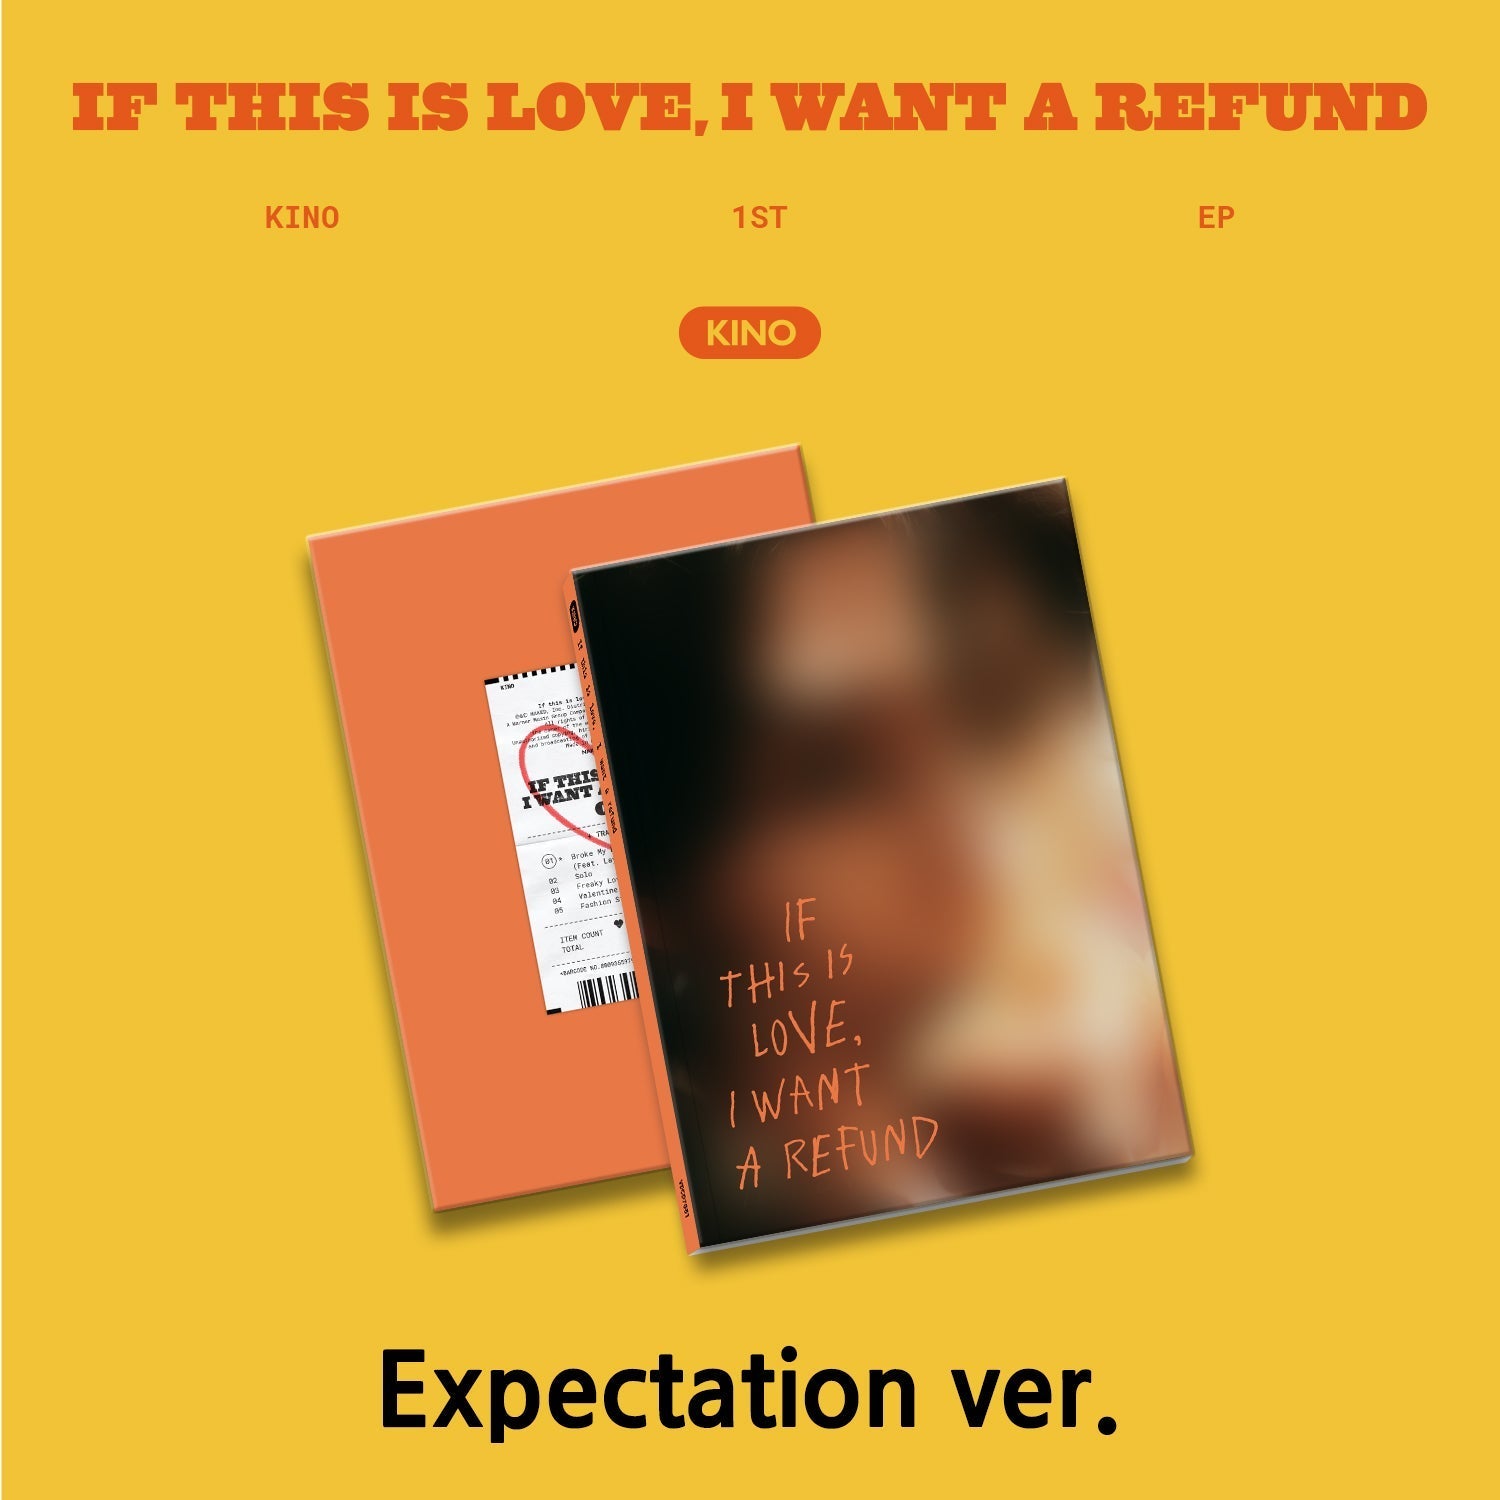 KINO - [If this is love, I want a refund] Expectation ver. - KPOPHERO